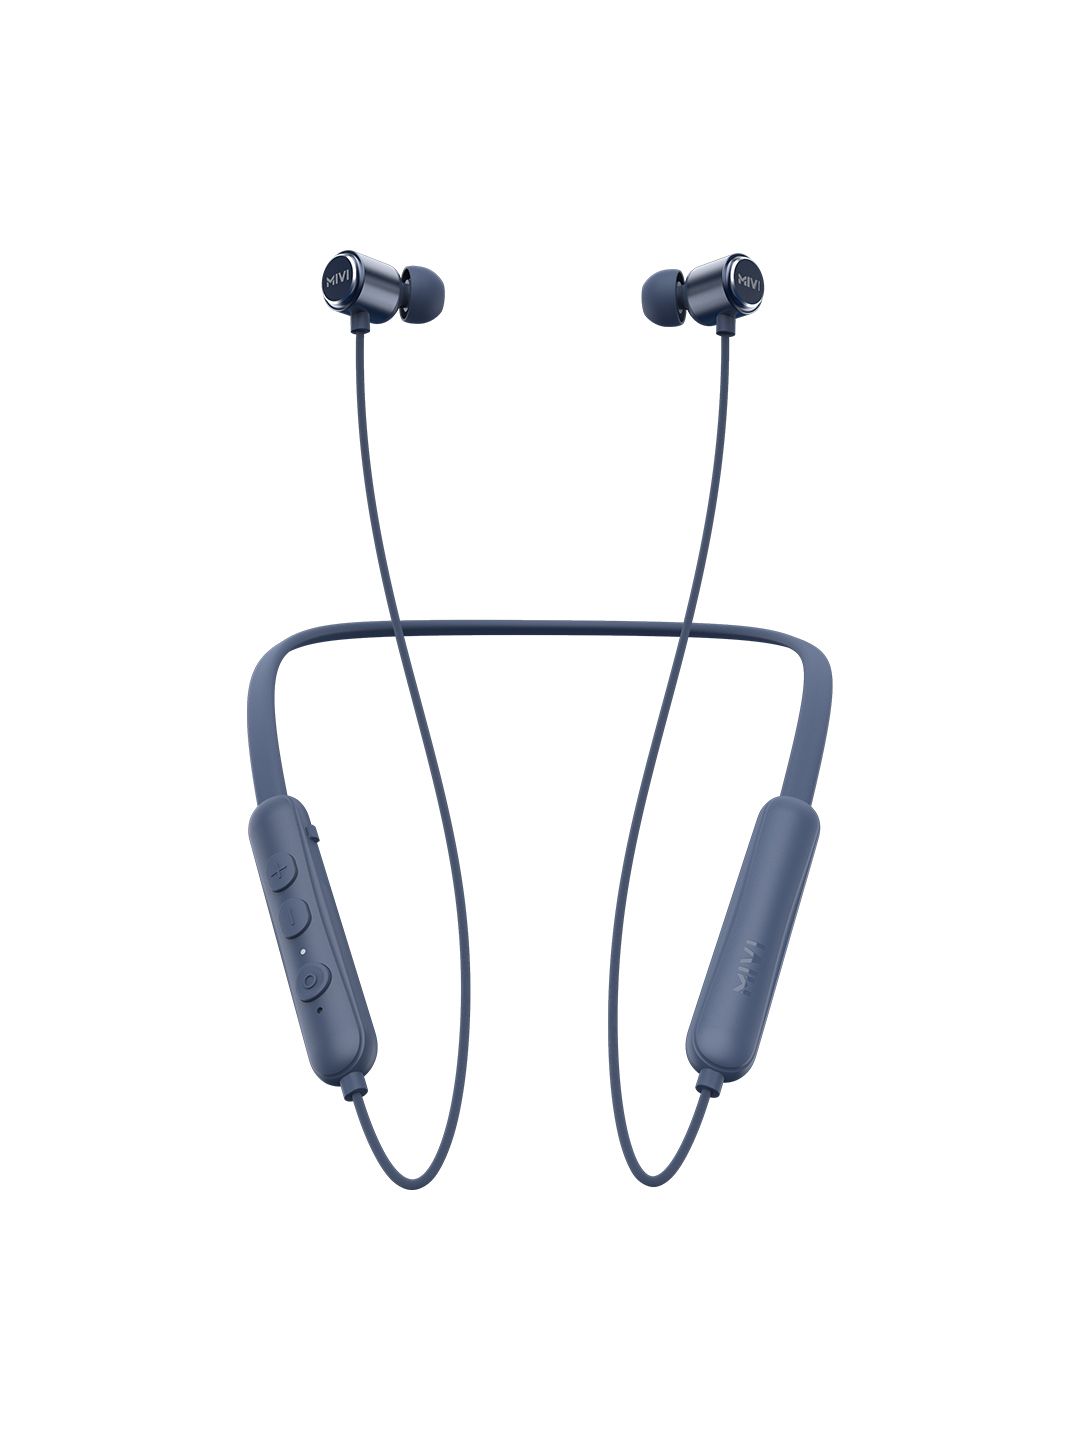 mivi Collar Flash Wireless Earphones with Mic & Fast Charging - Blue Price in India